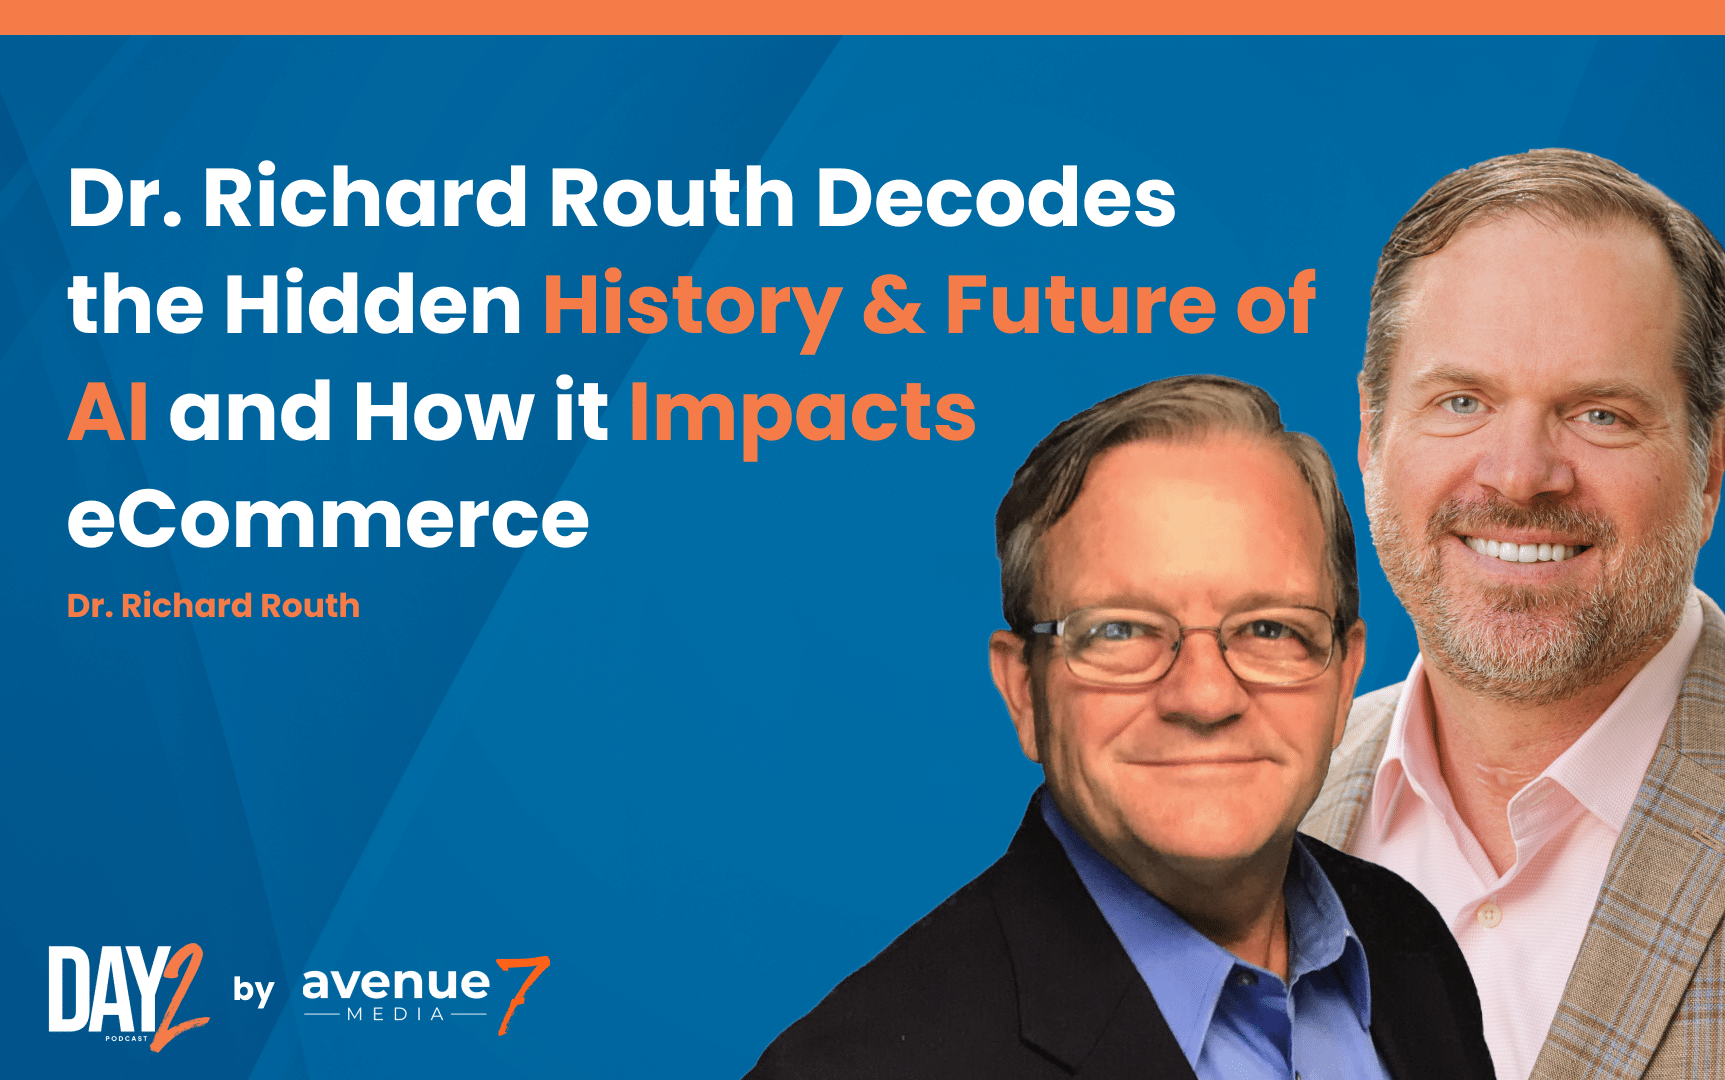 Dr. Richard Routh Shares the Hidden Story of AI and How it Impacts eCommerce